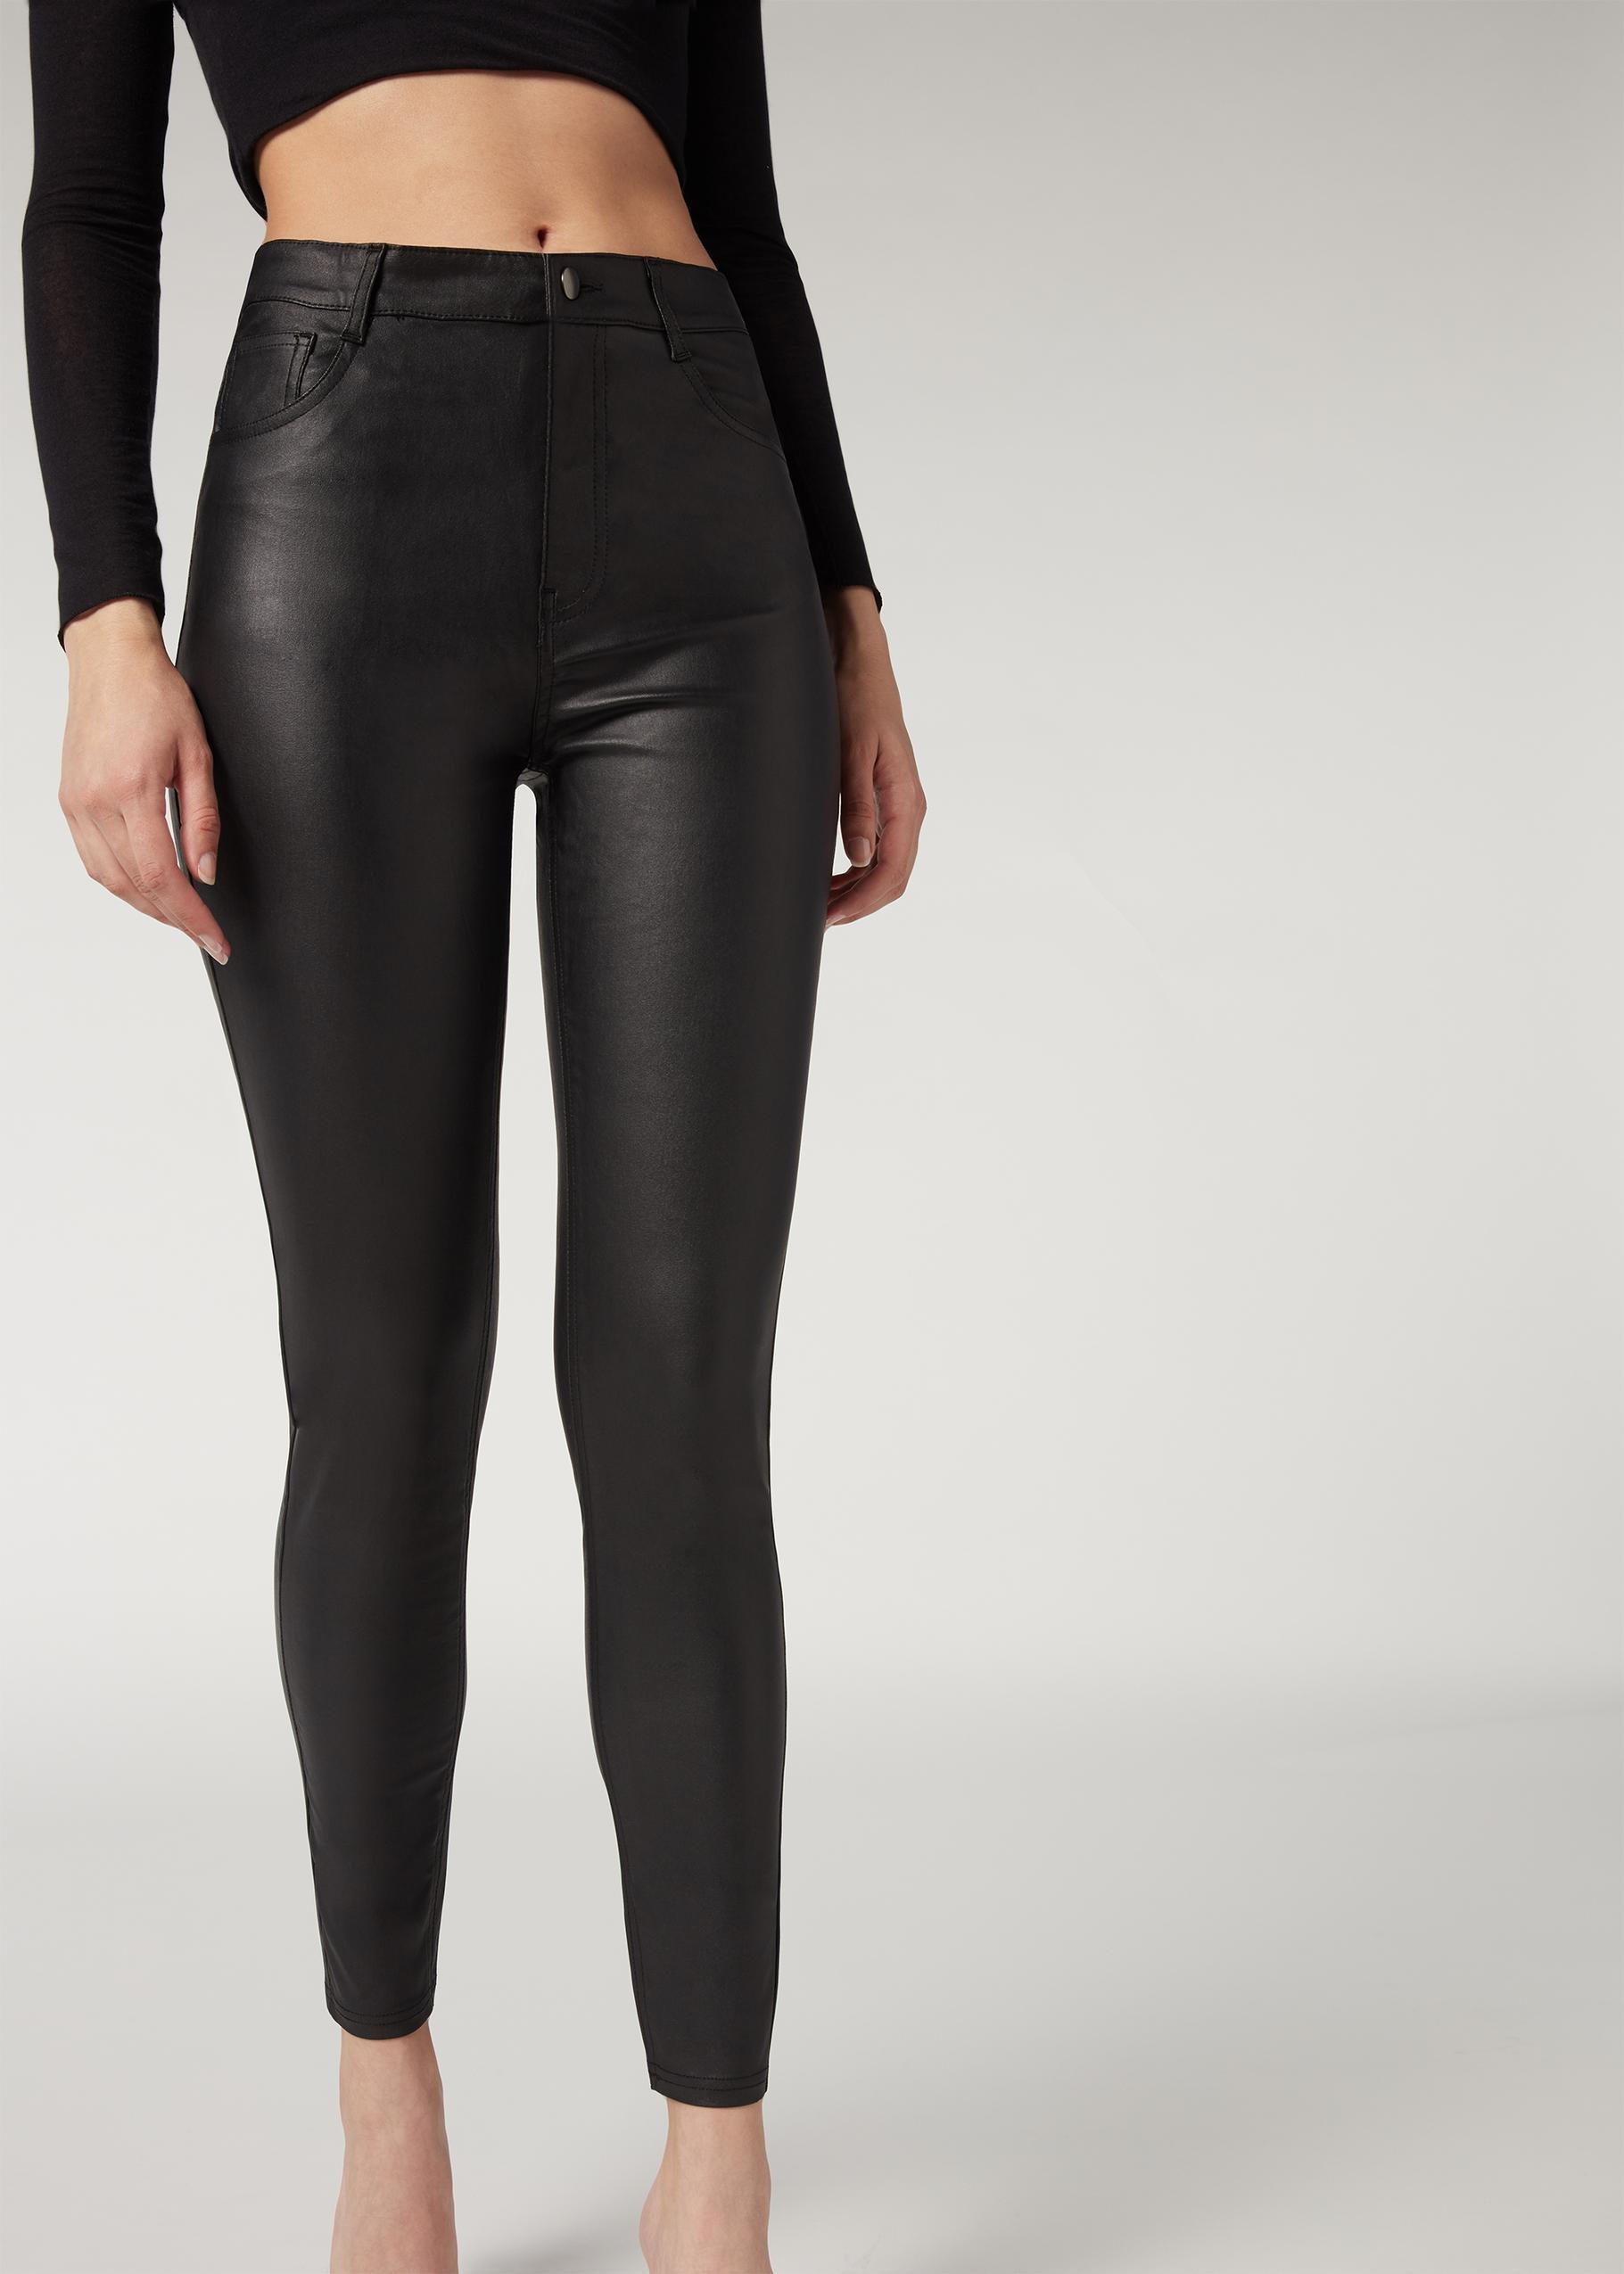 Calzedonia - Black Leather-Look Jeans